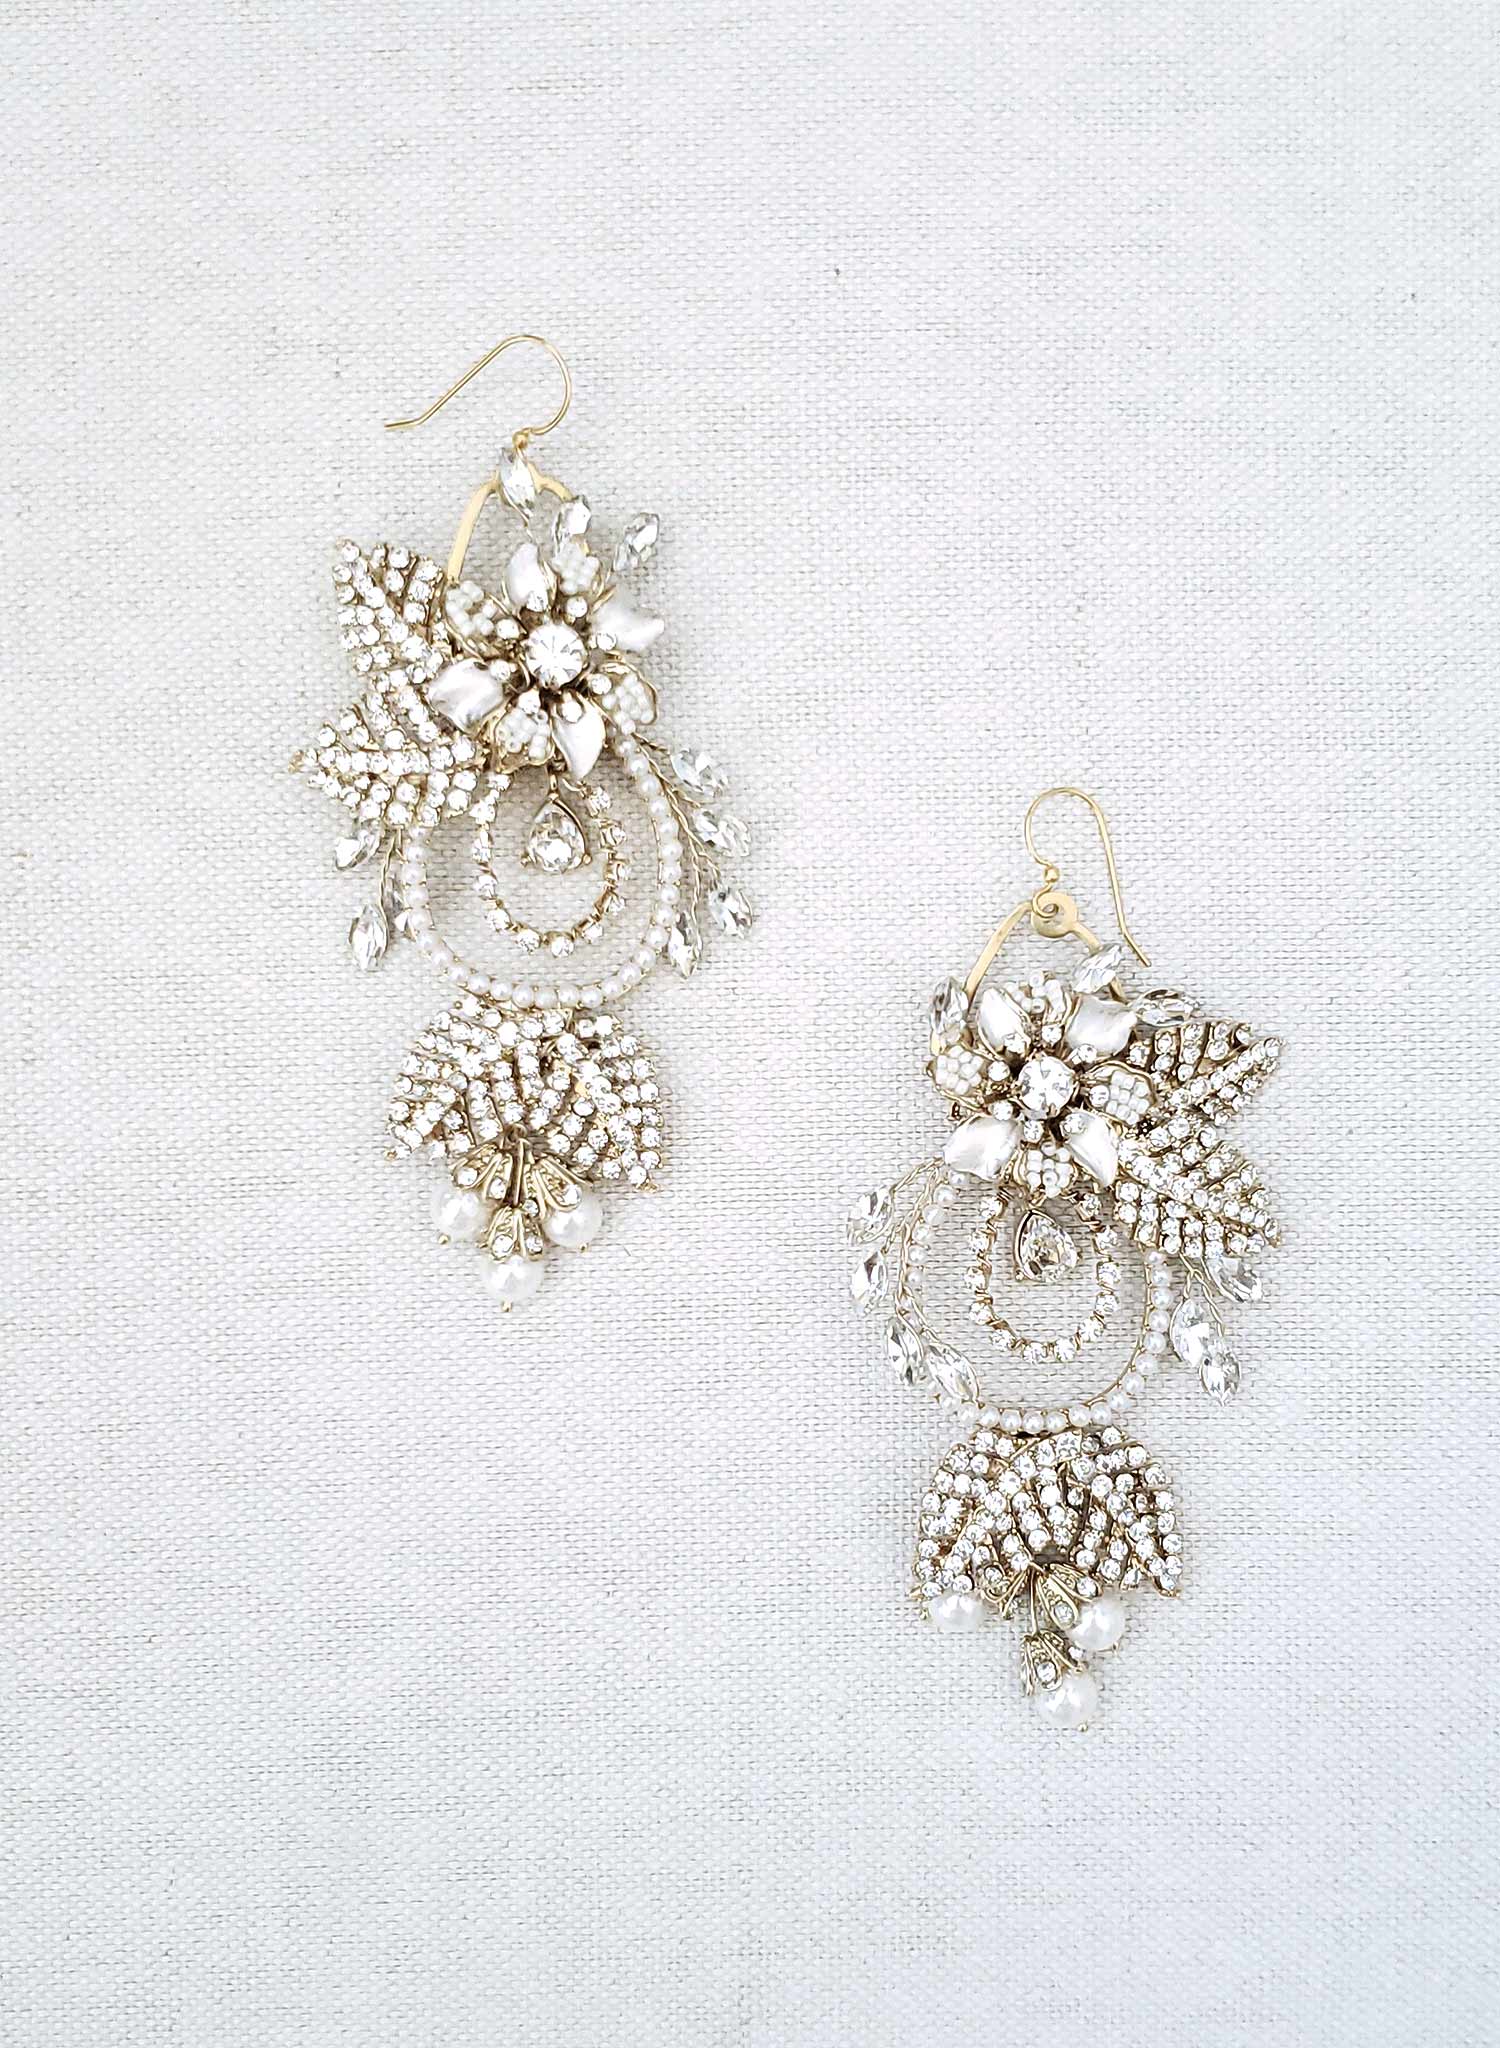 Gold and crystal floral bridal earrings